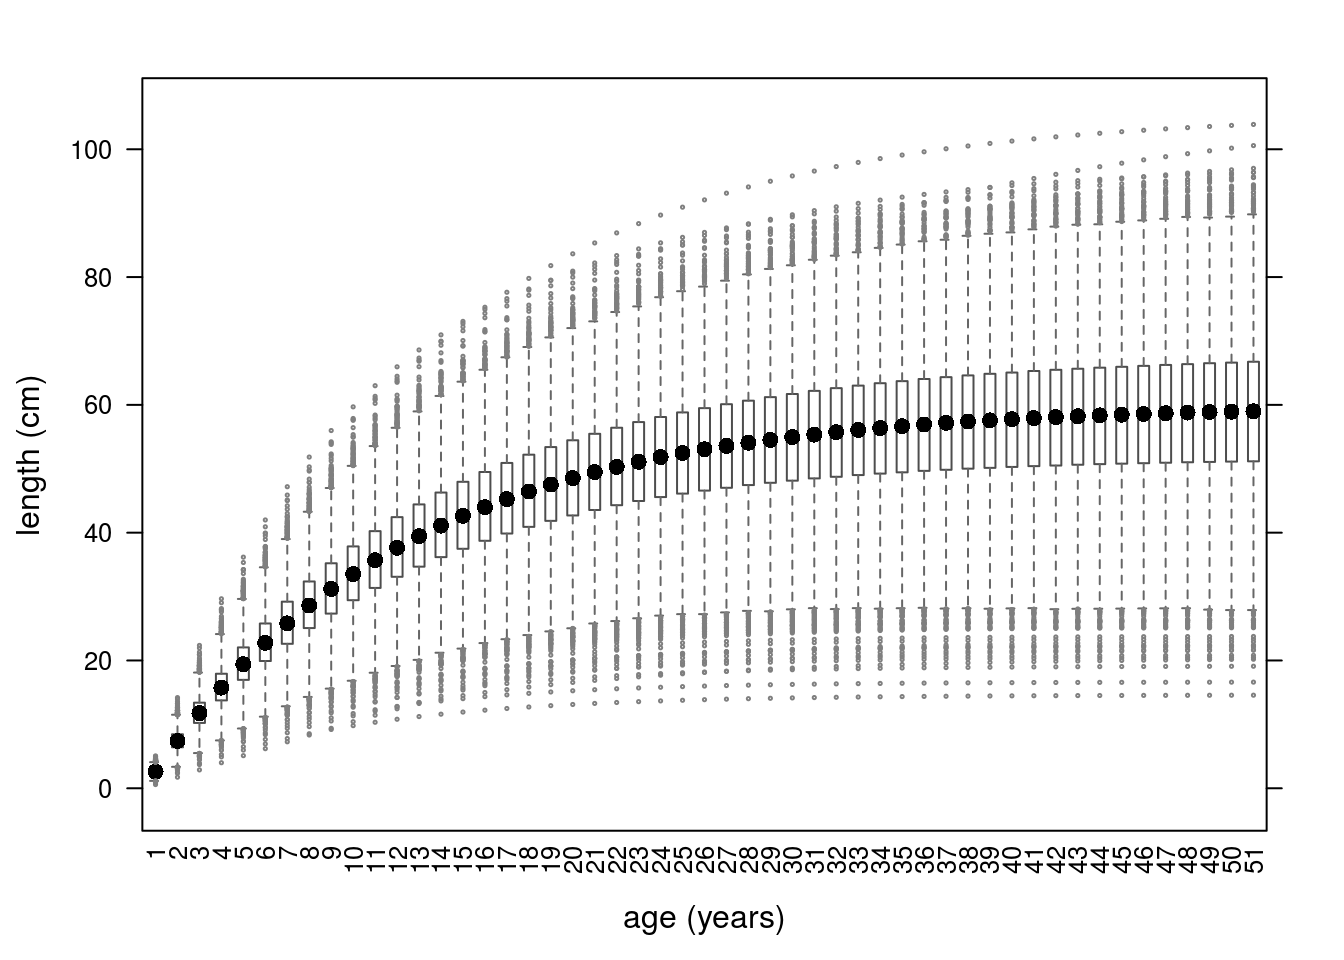 Growth curves using parameters simulated from a multivariate normal distribution.